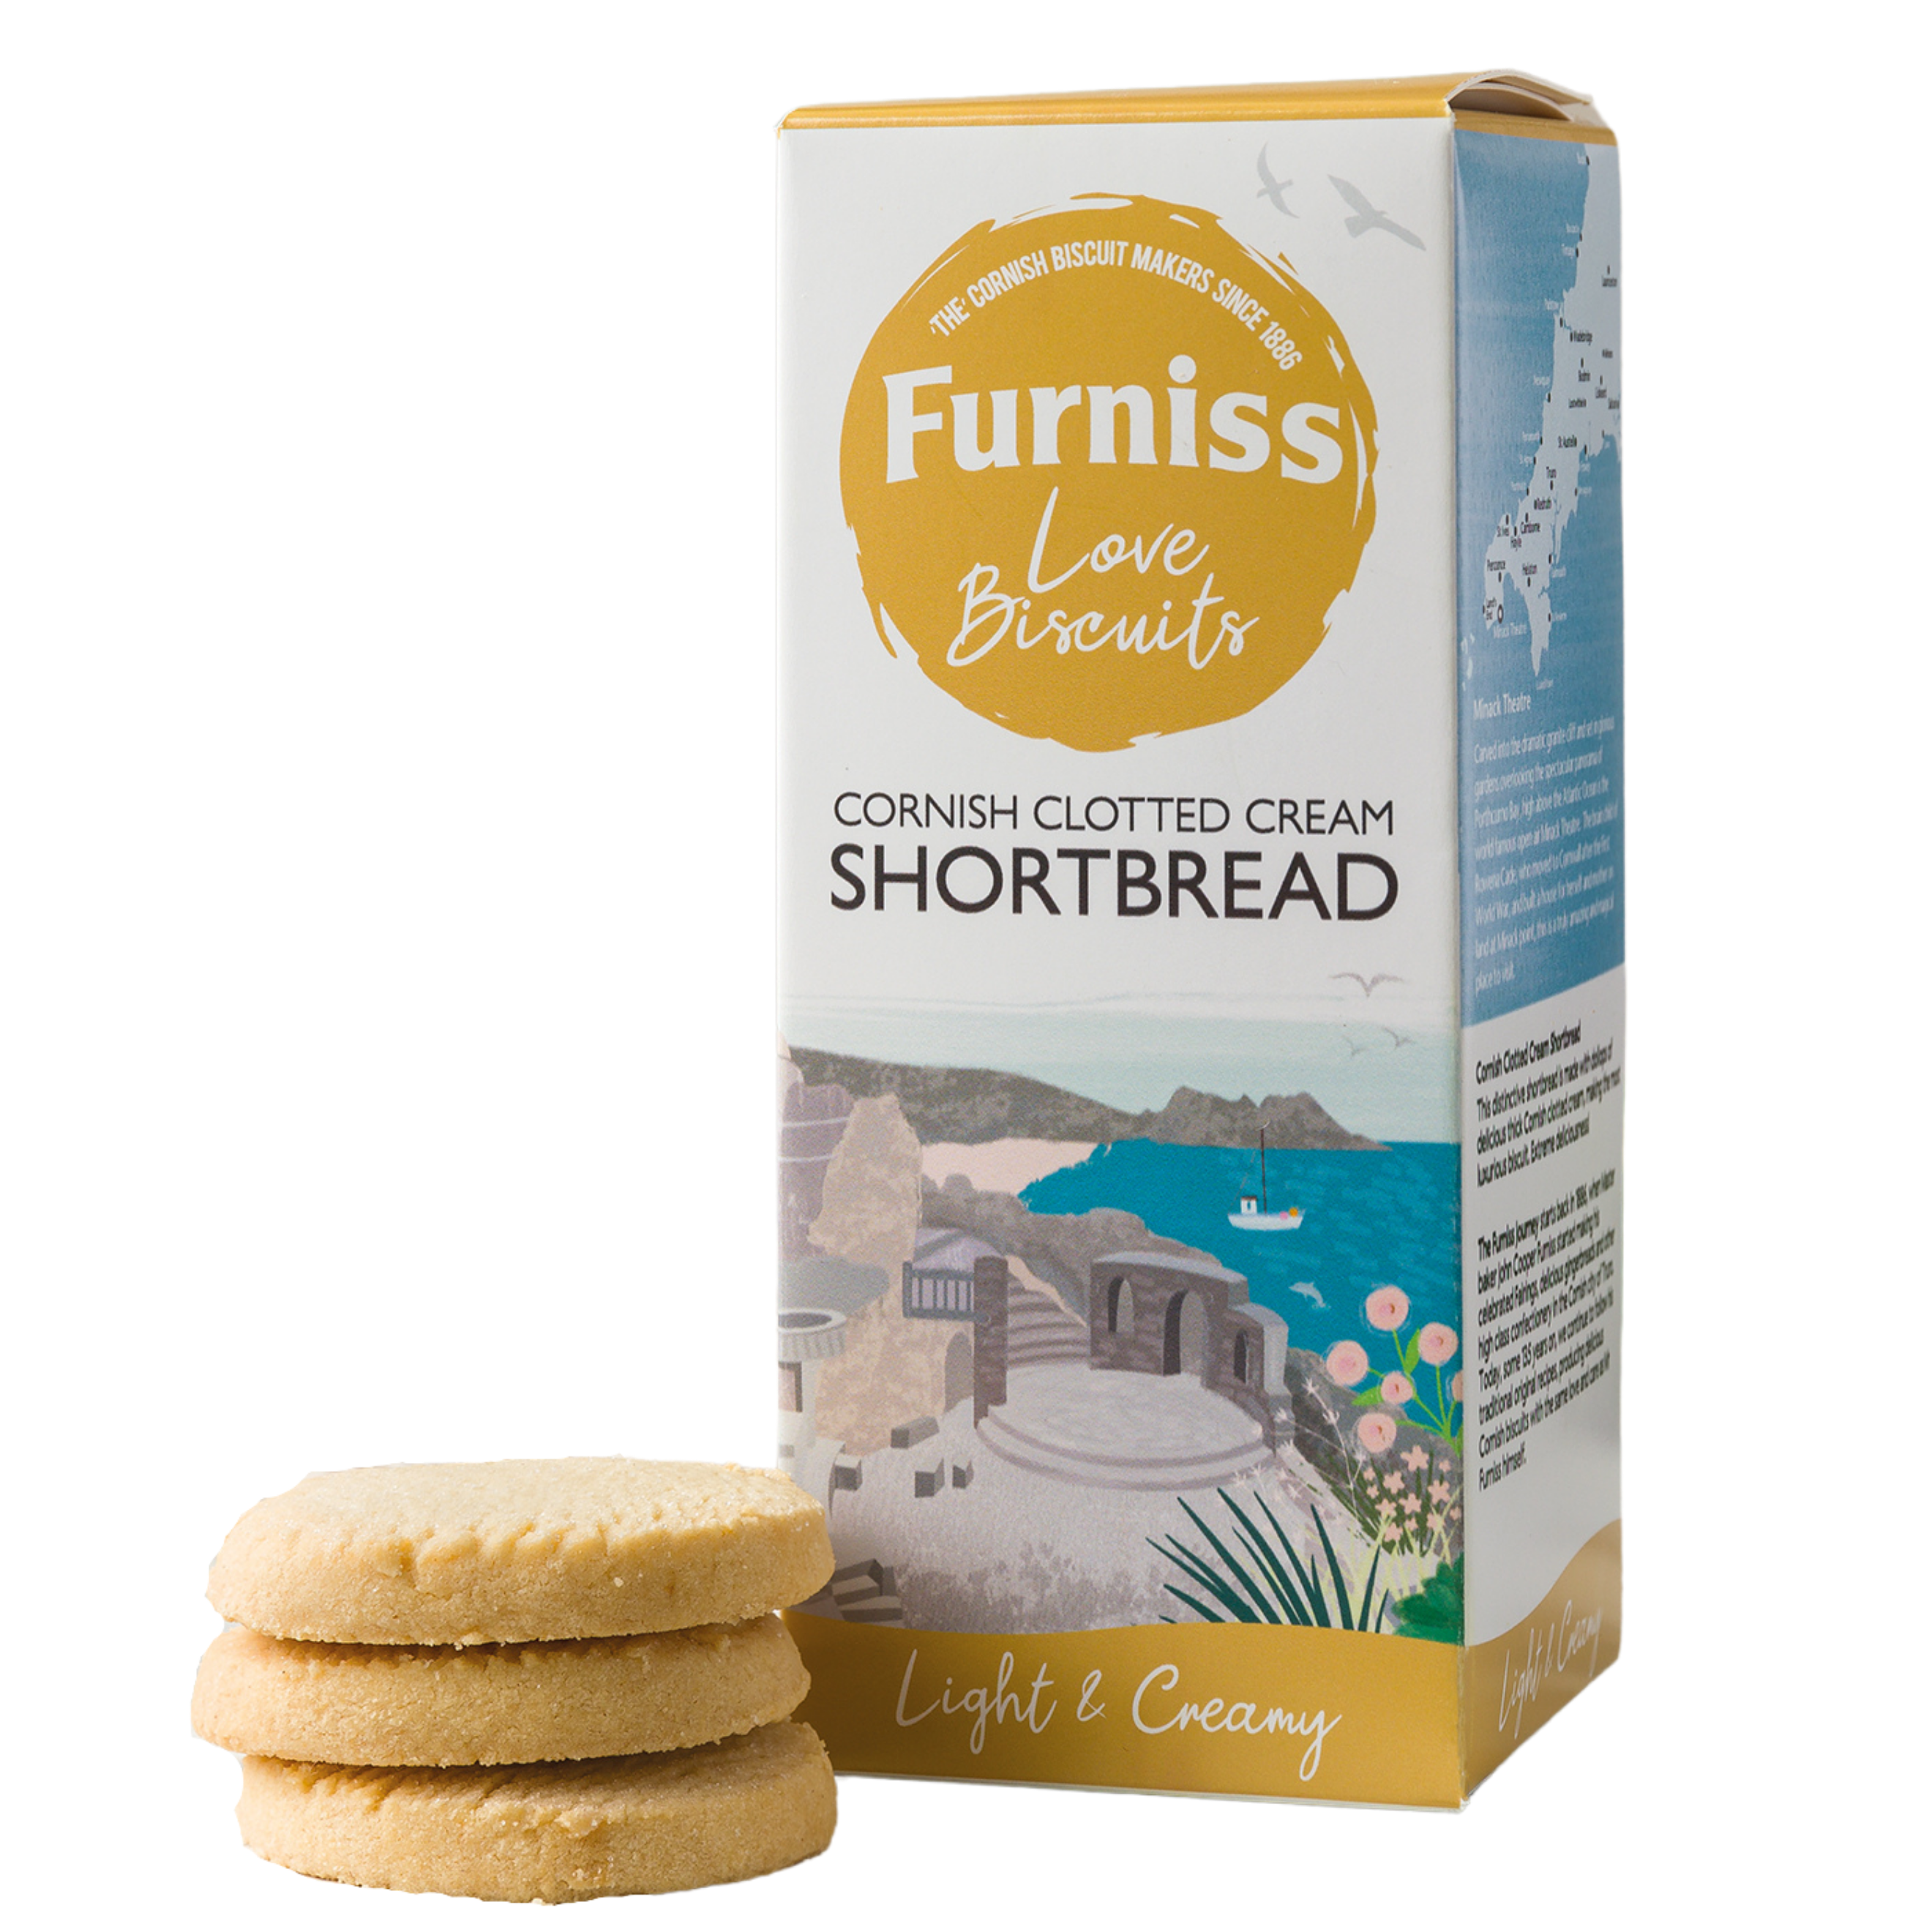 Furniss 200g Shortbread biscuits